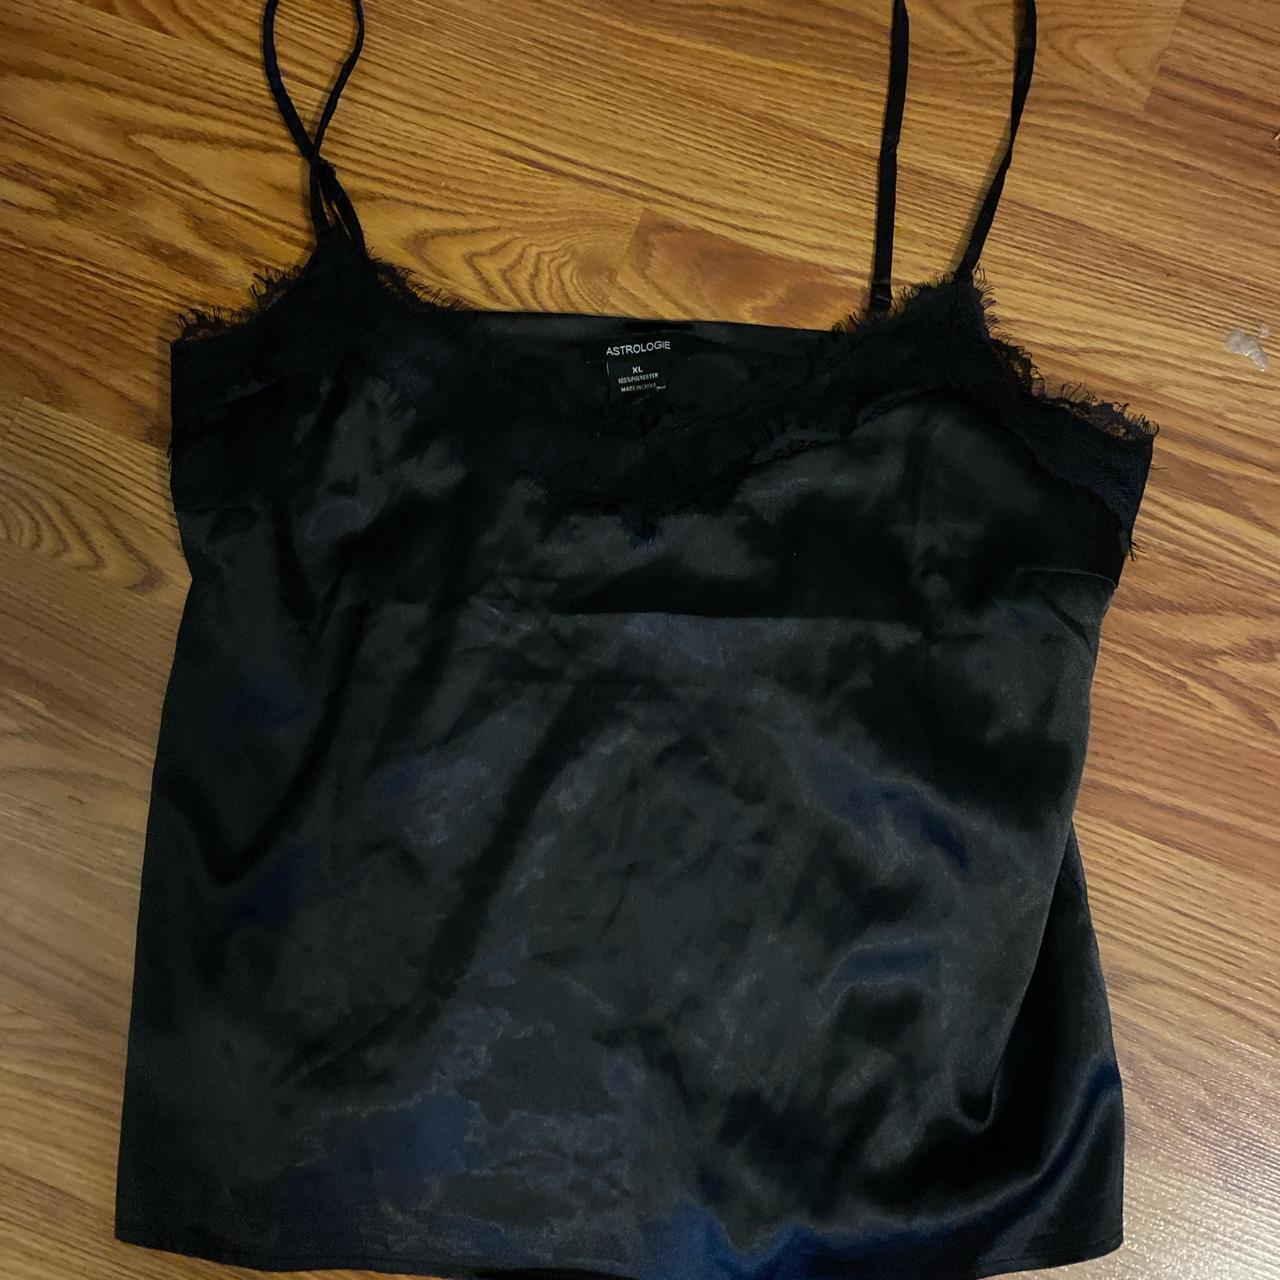 Satin with lace trim cami tank. Really cute but I... - Depop